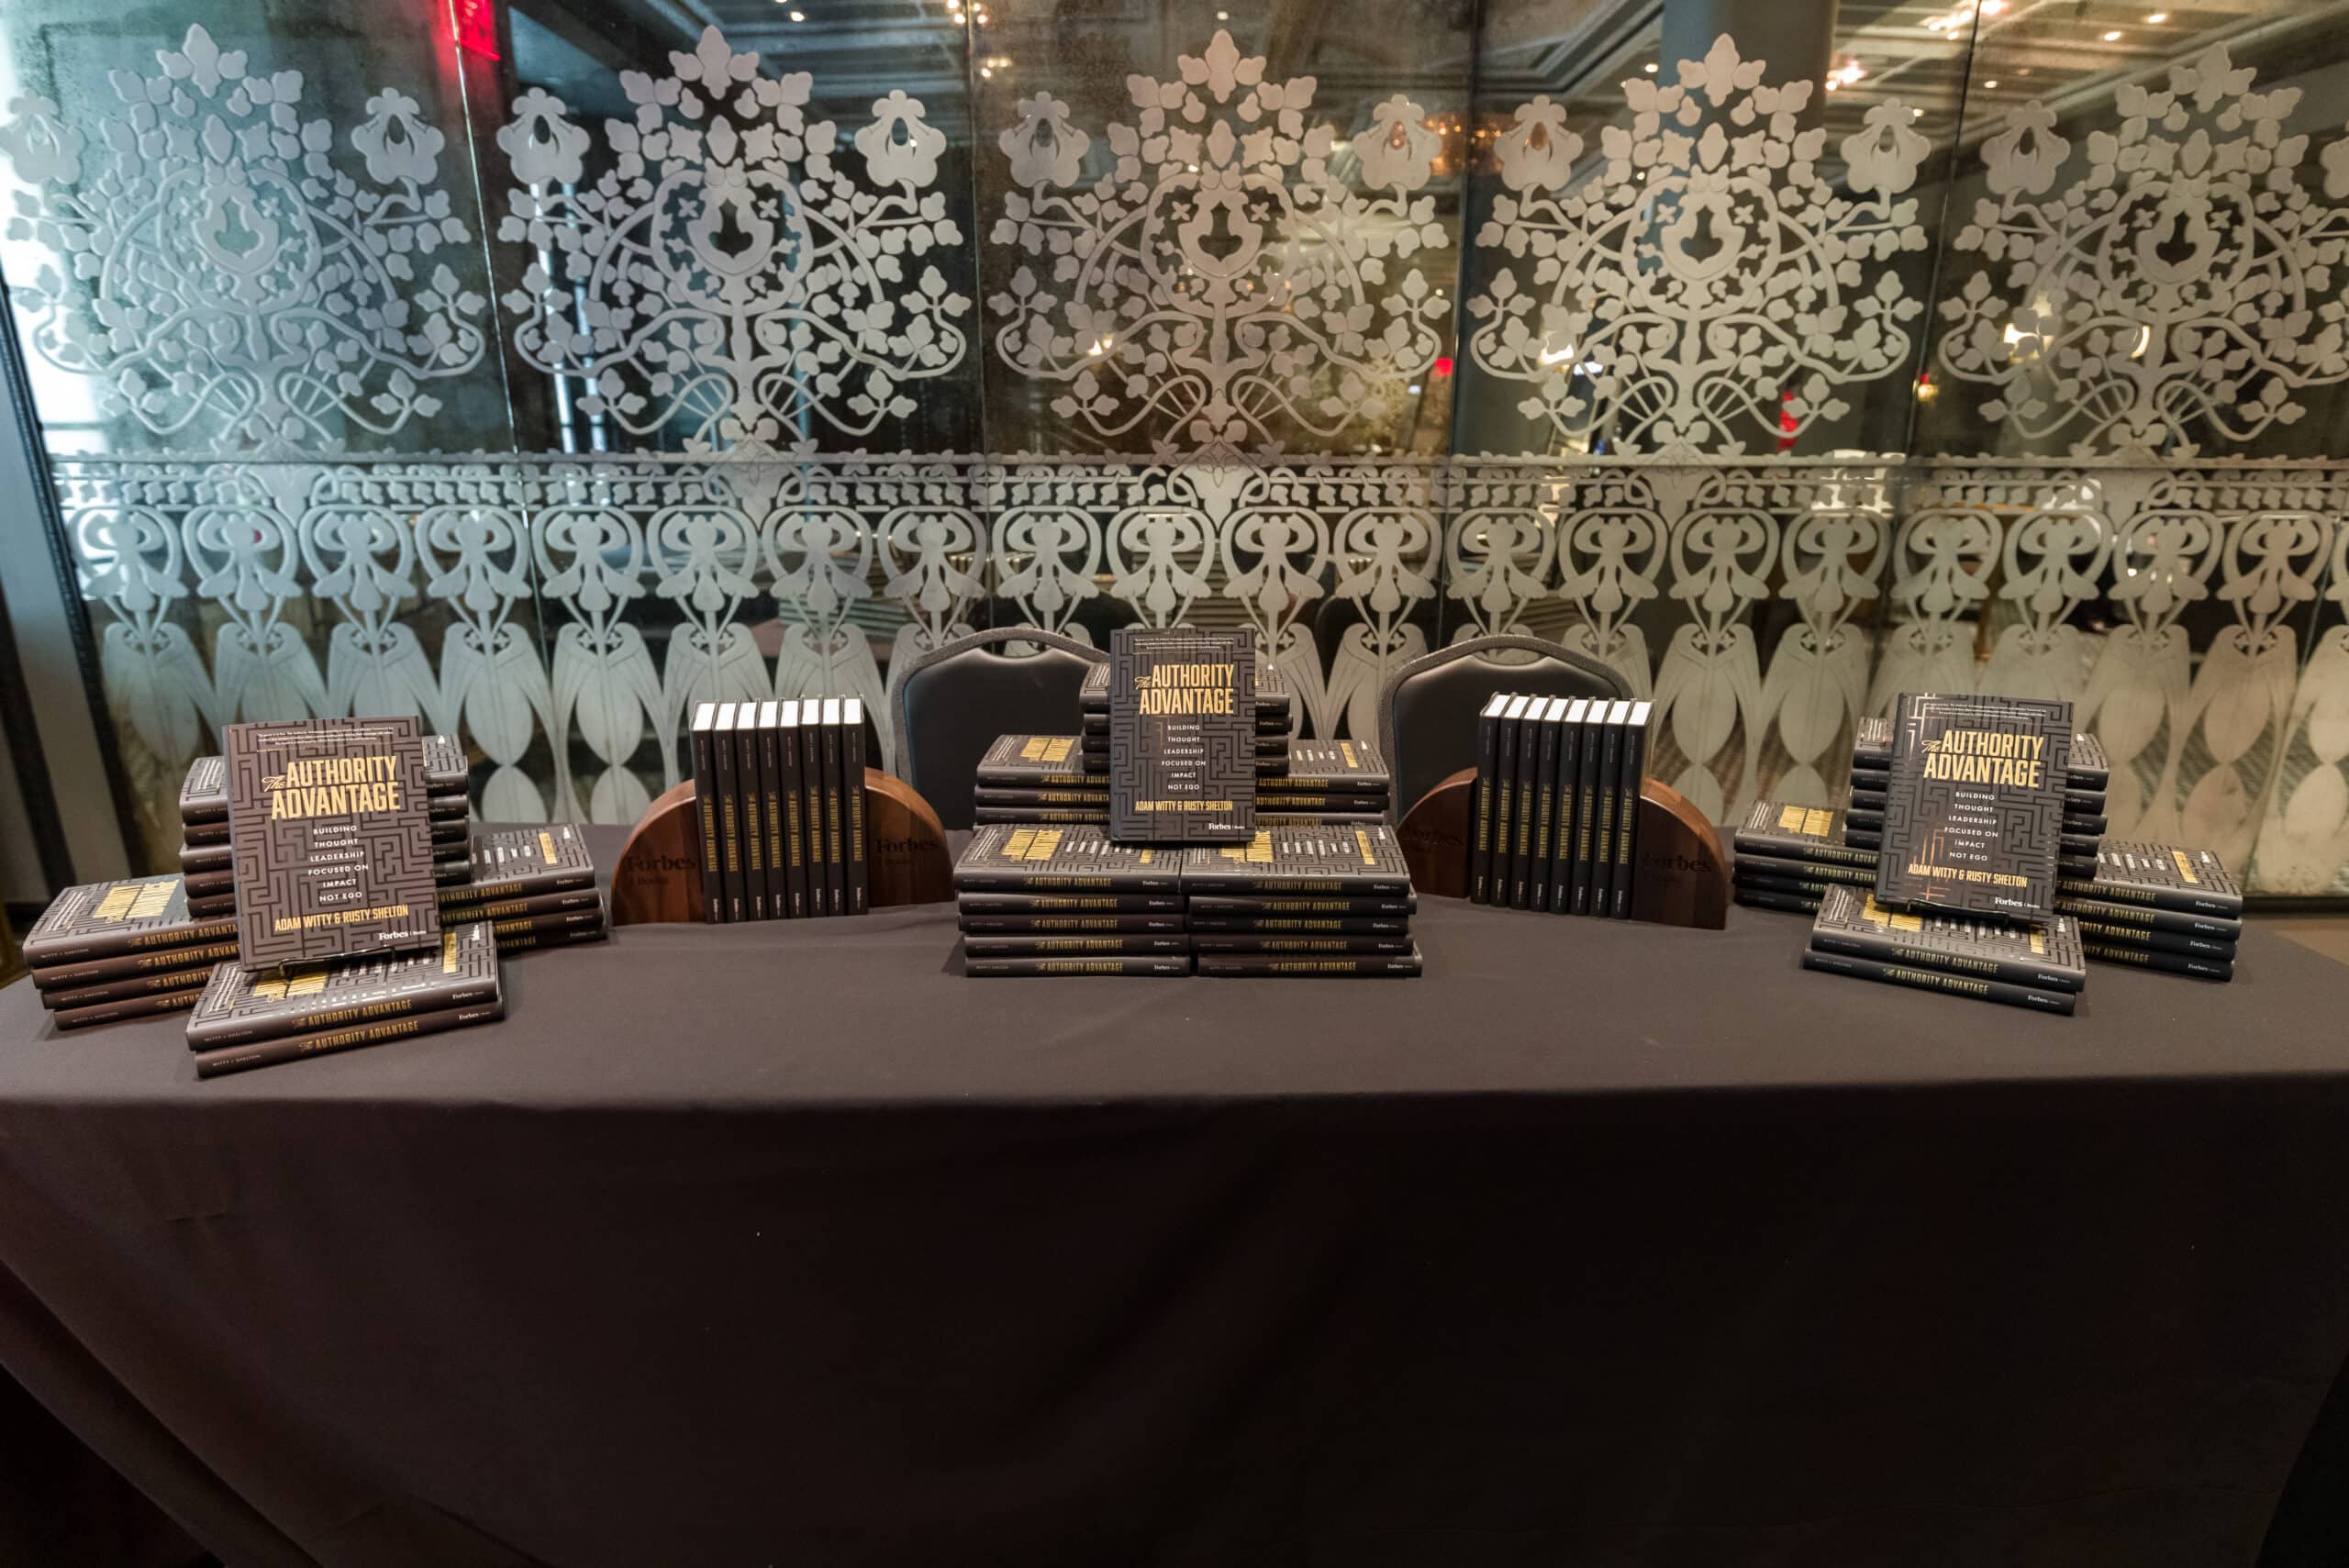 the authority advantage book on display at forbes on 5th event